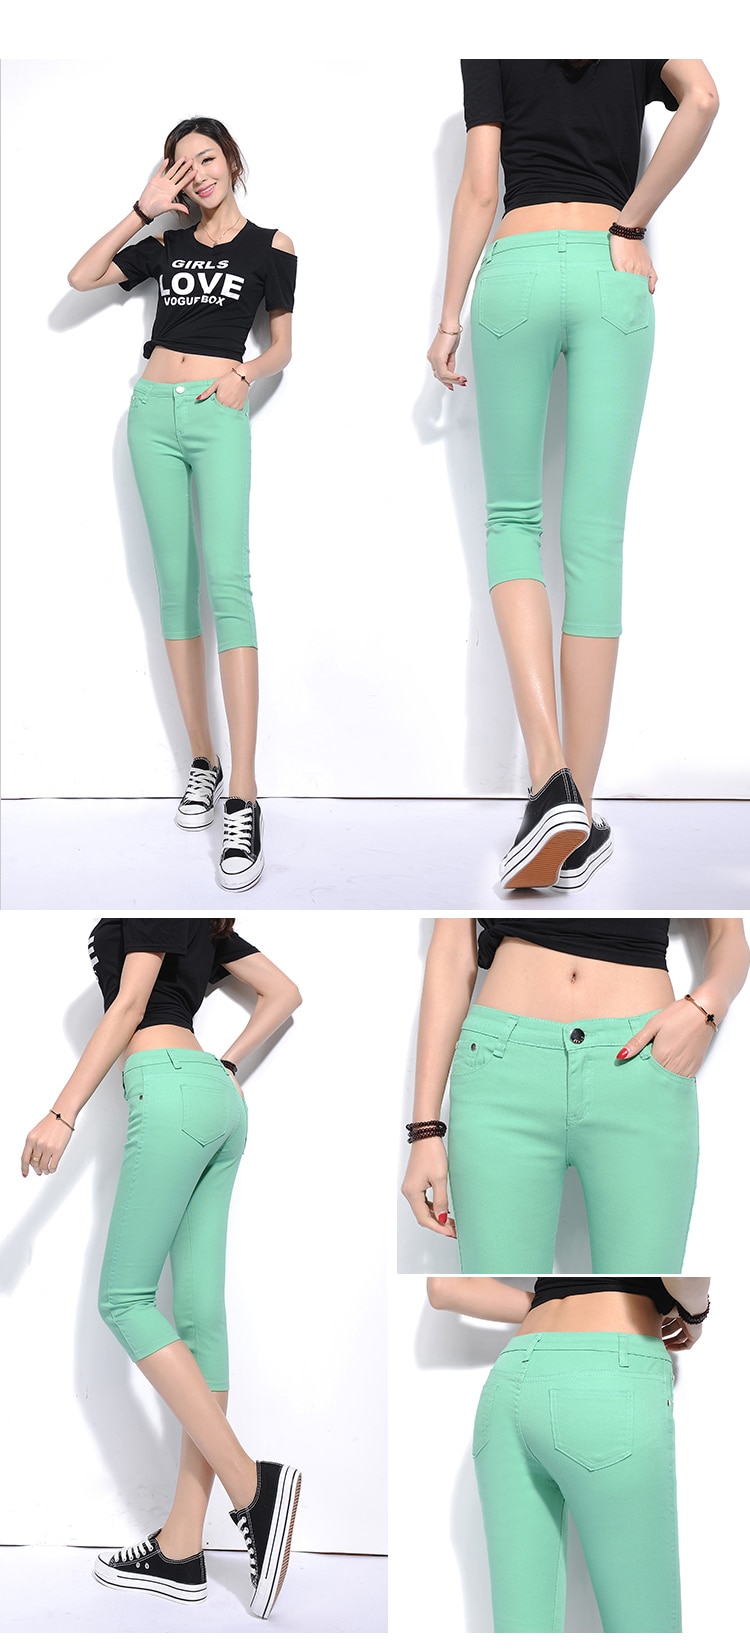 2018 New Spring Leisure Stretch Candy Color Cropped pants Female pencil pants Thin section Trousers Female feet Breeches (16)